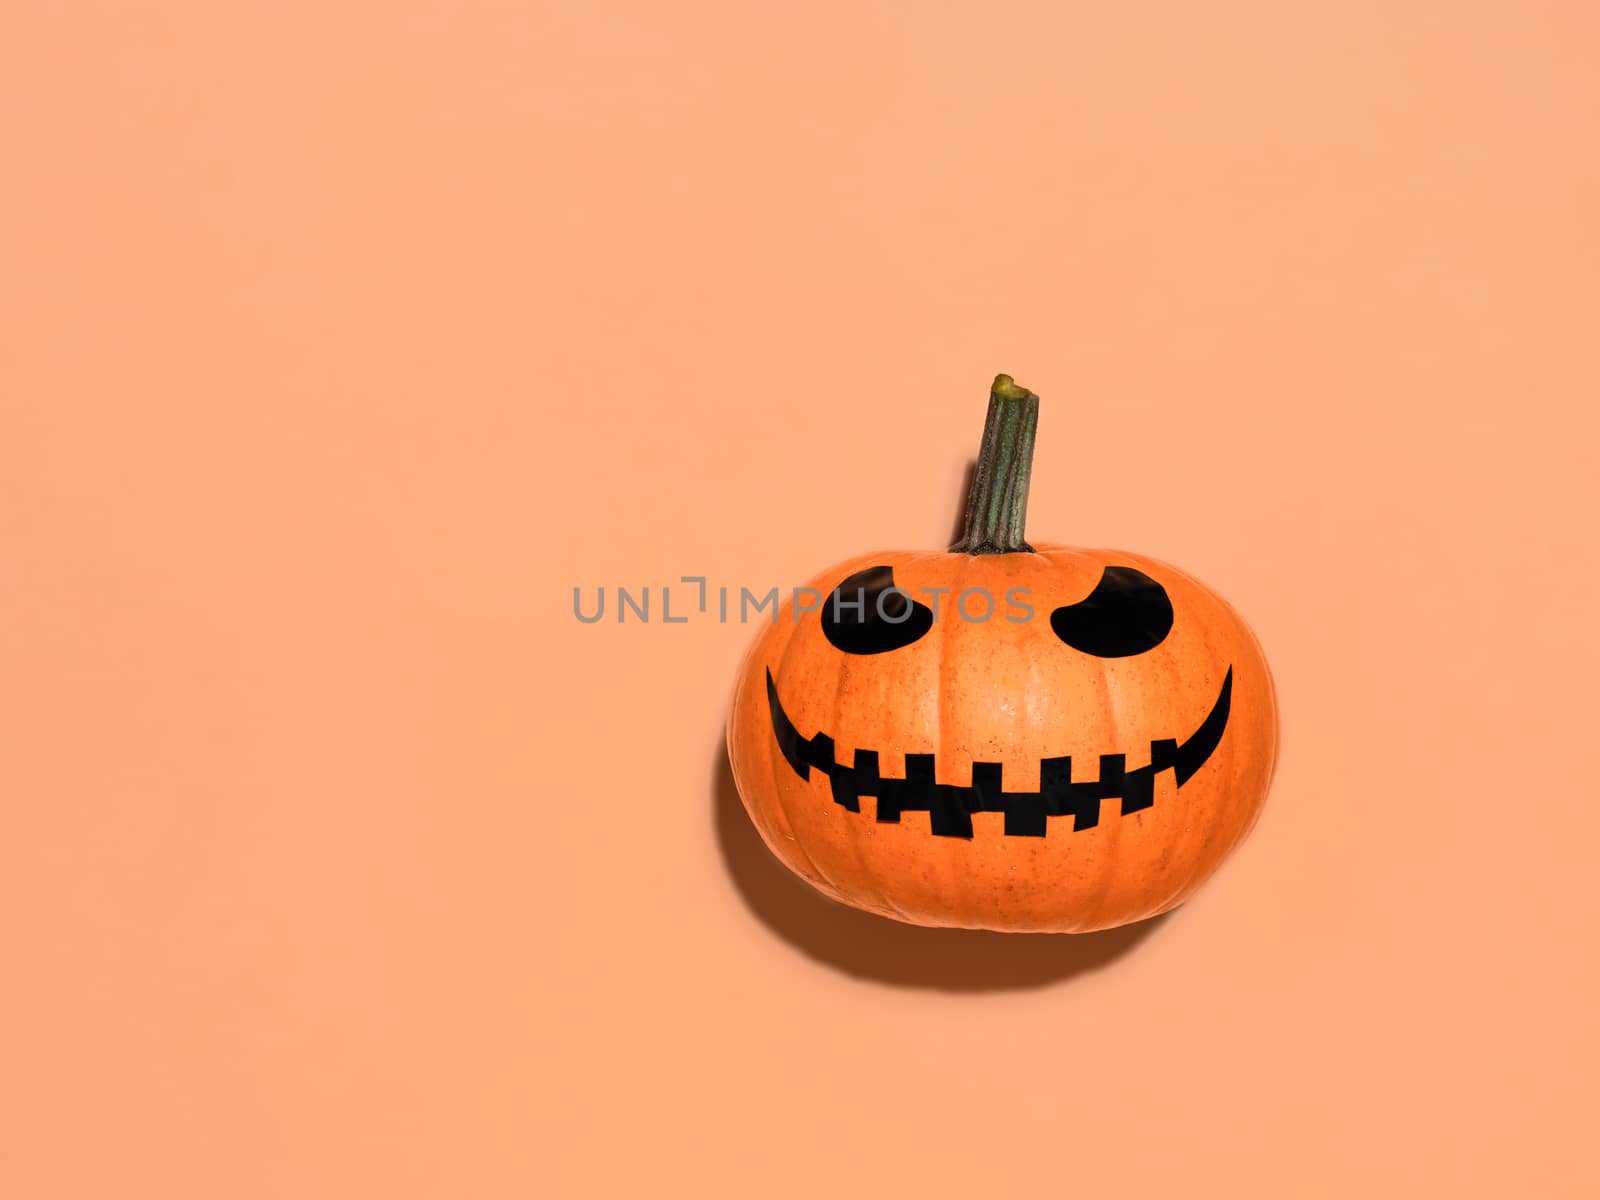 Halloween pumpkin on orange background. Halloween concept with copy space for text or design. Hard light. Jack-o-lantern laughing face on bright orange squash